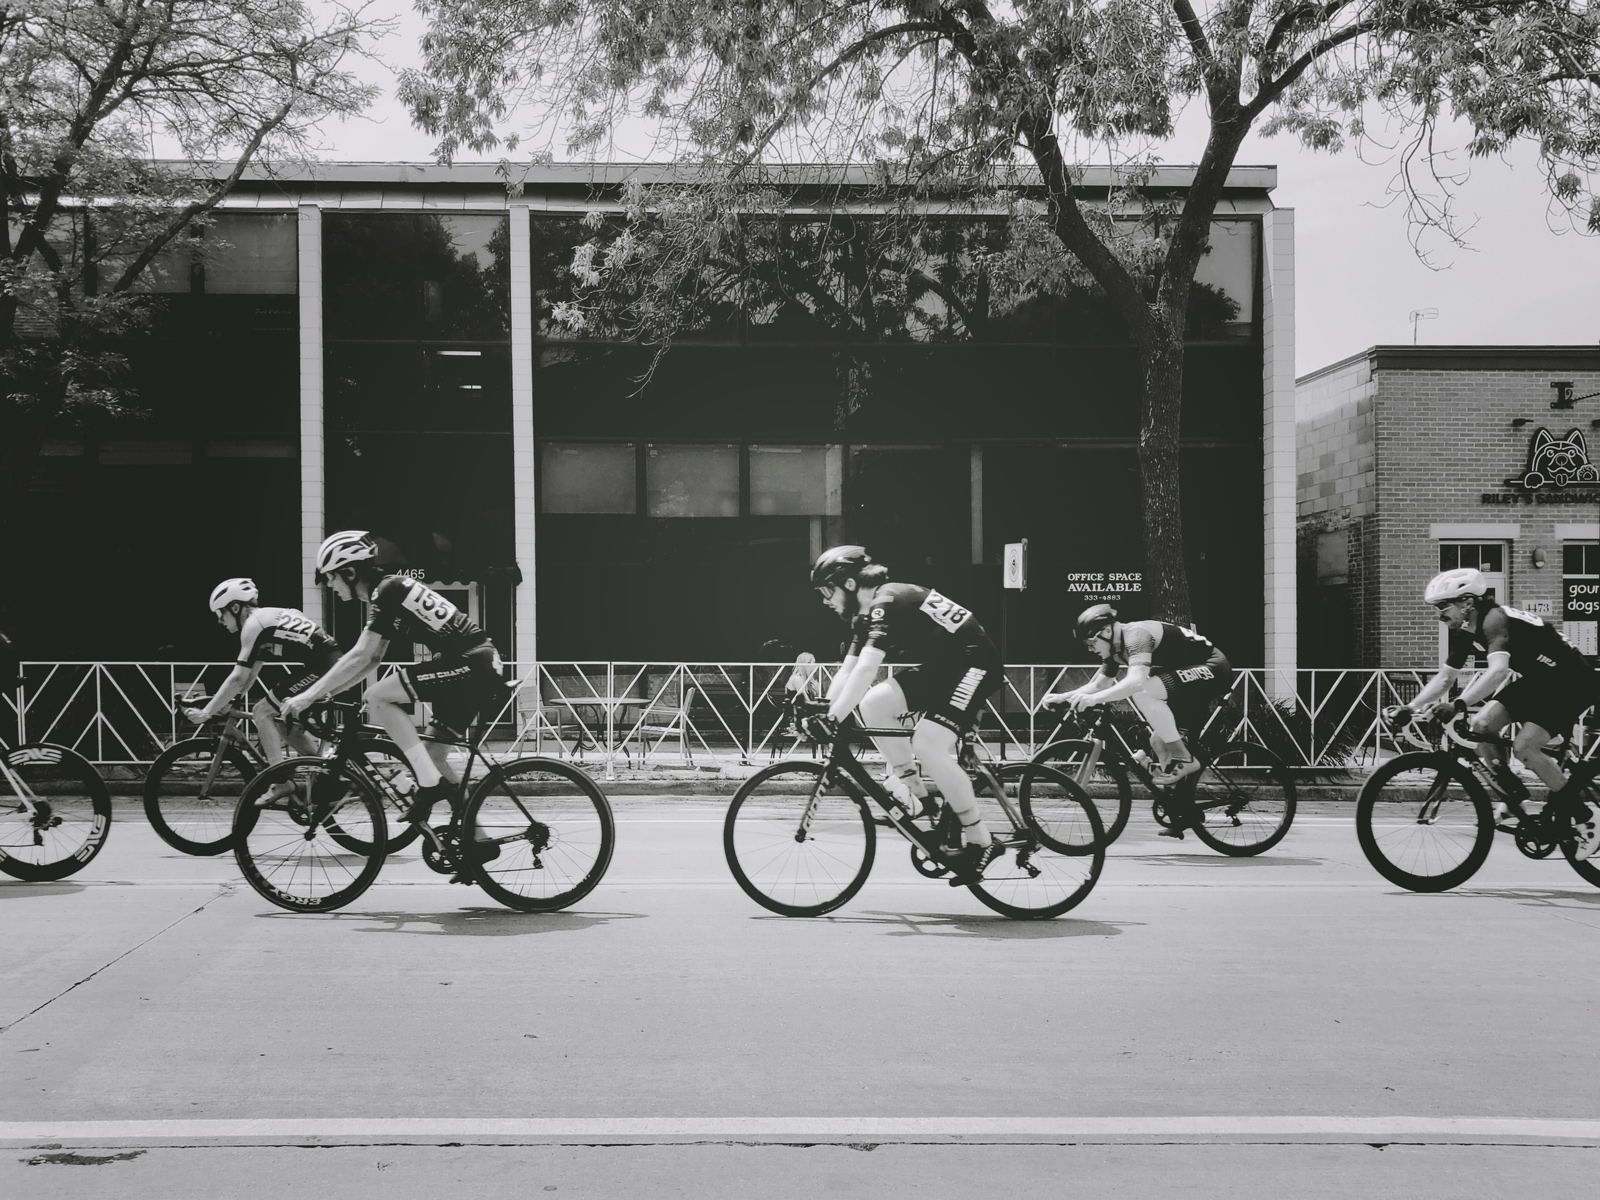 Bike racers in Shorewood at the Tour of America's Dairyland in black and white.